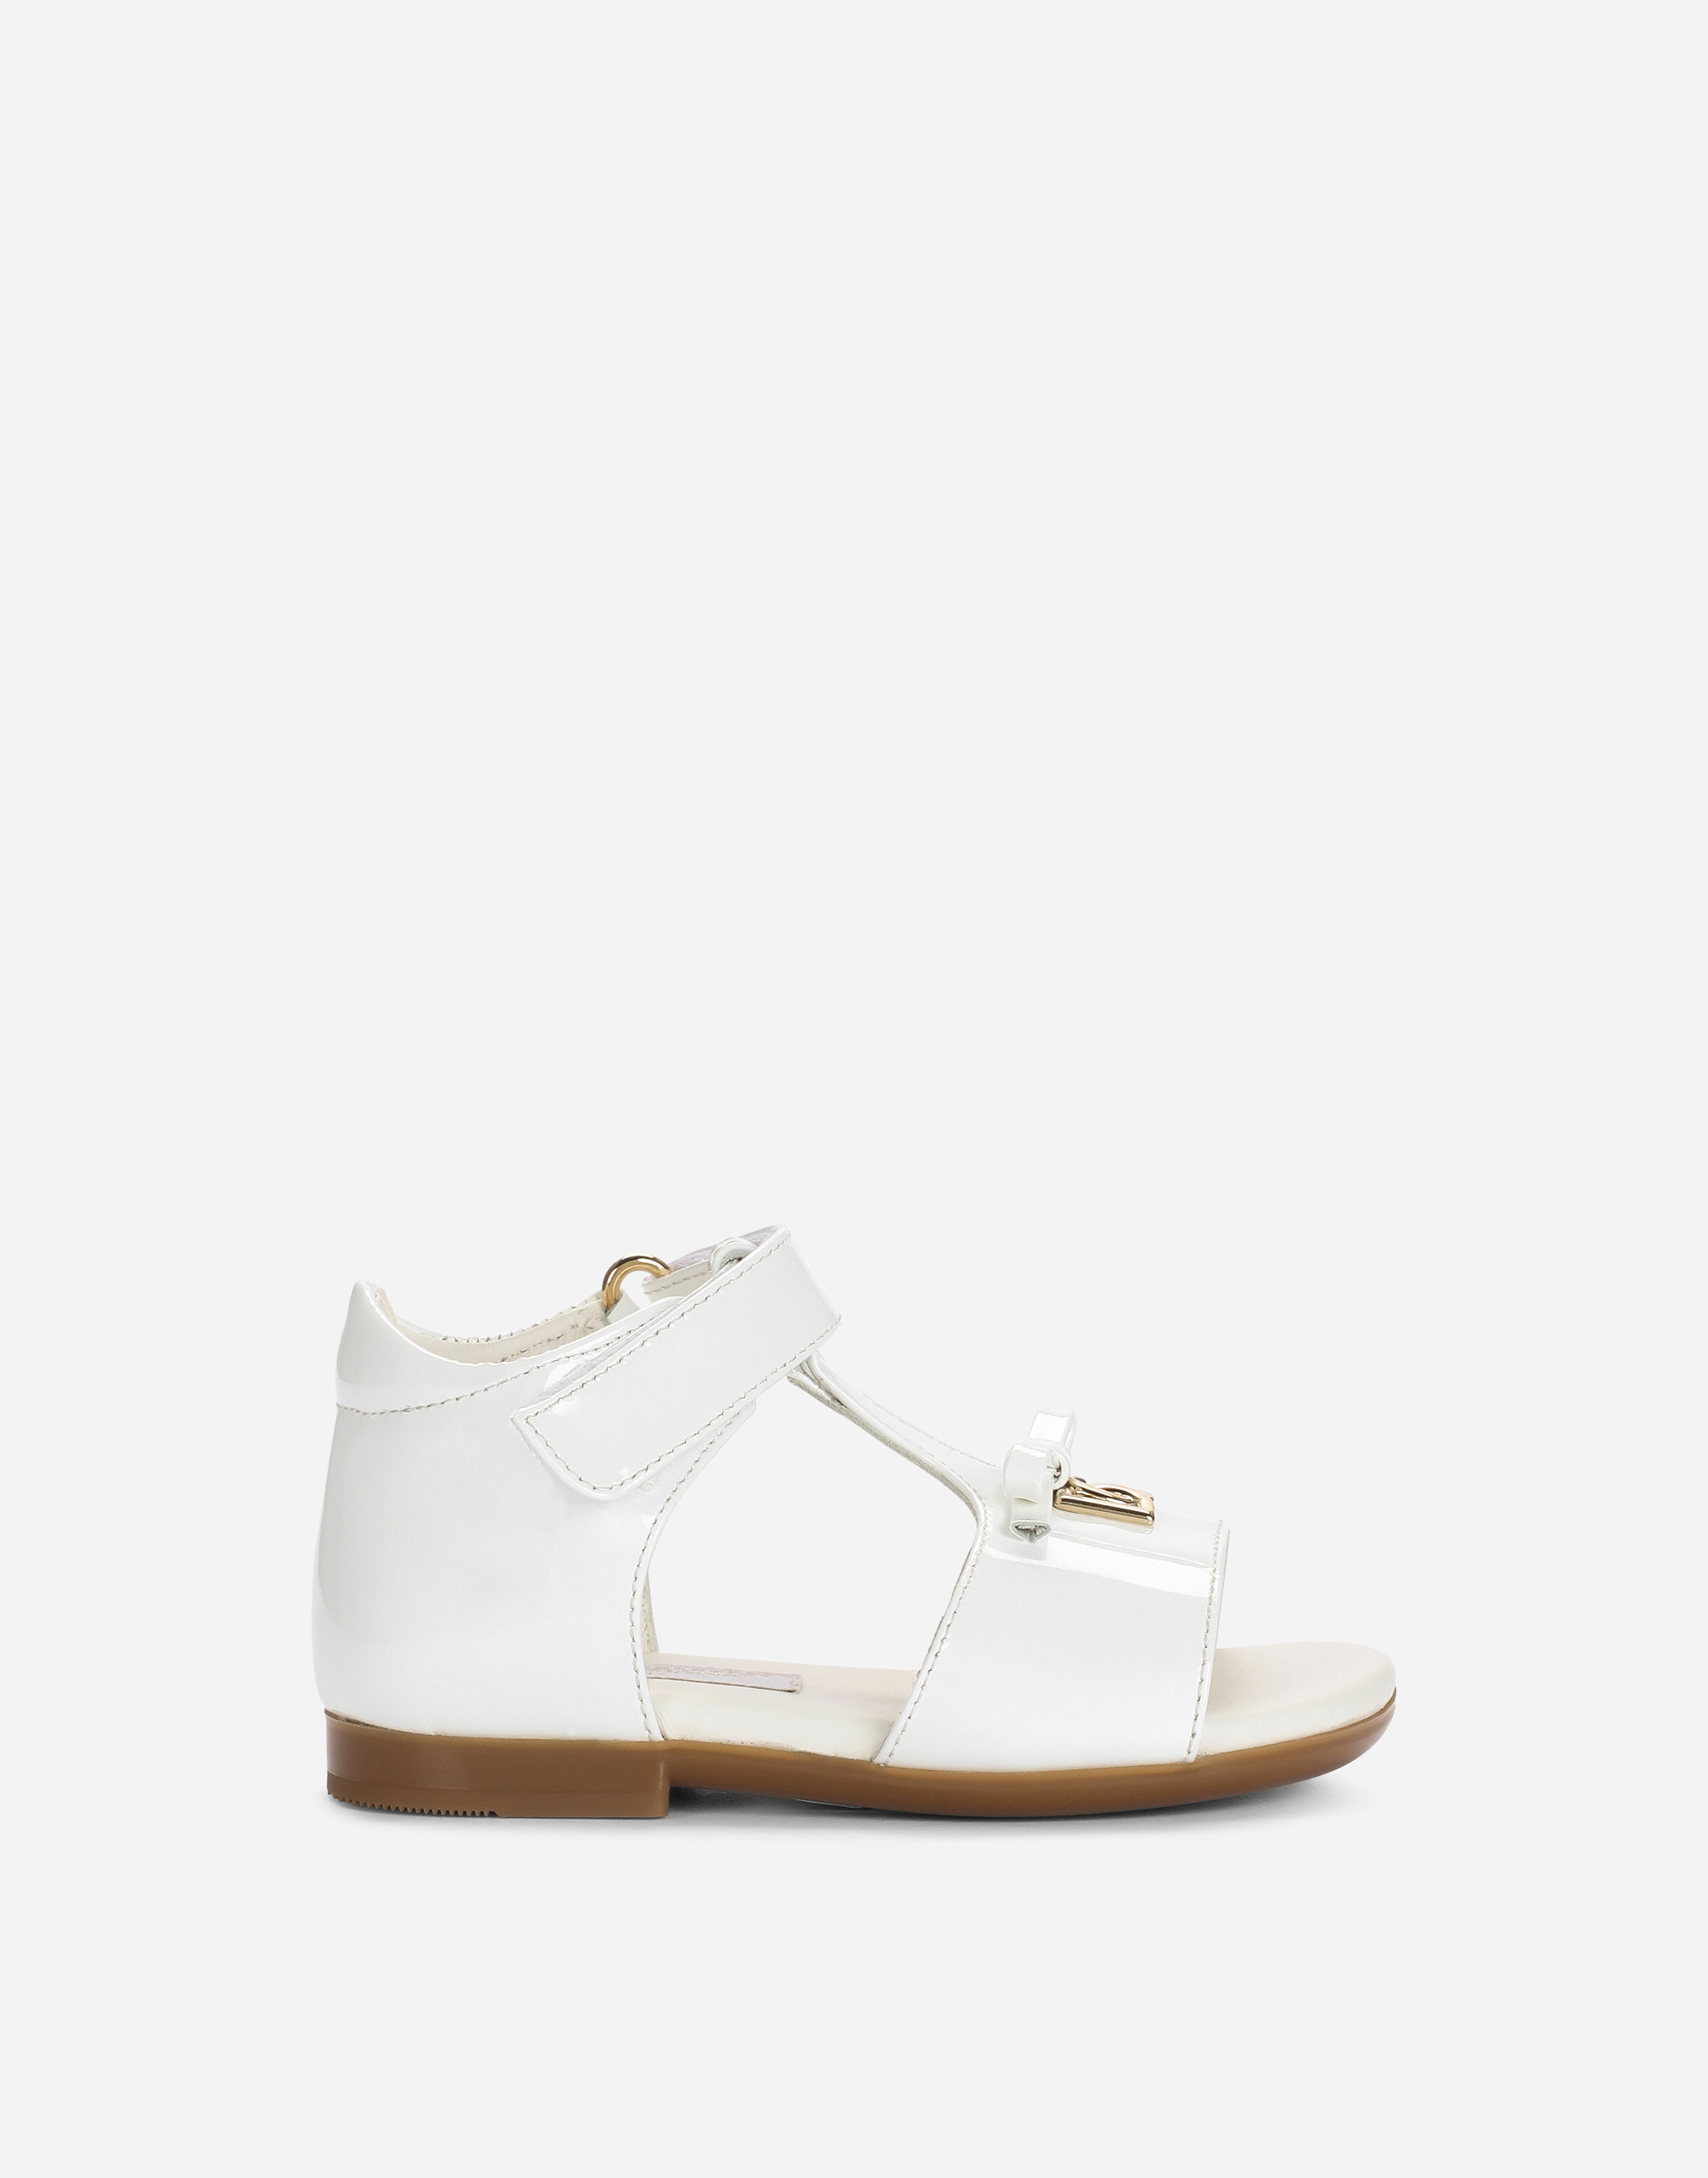 Patent leather first steps sandals with metal DG logo in White